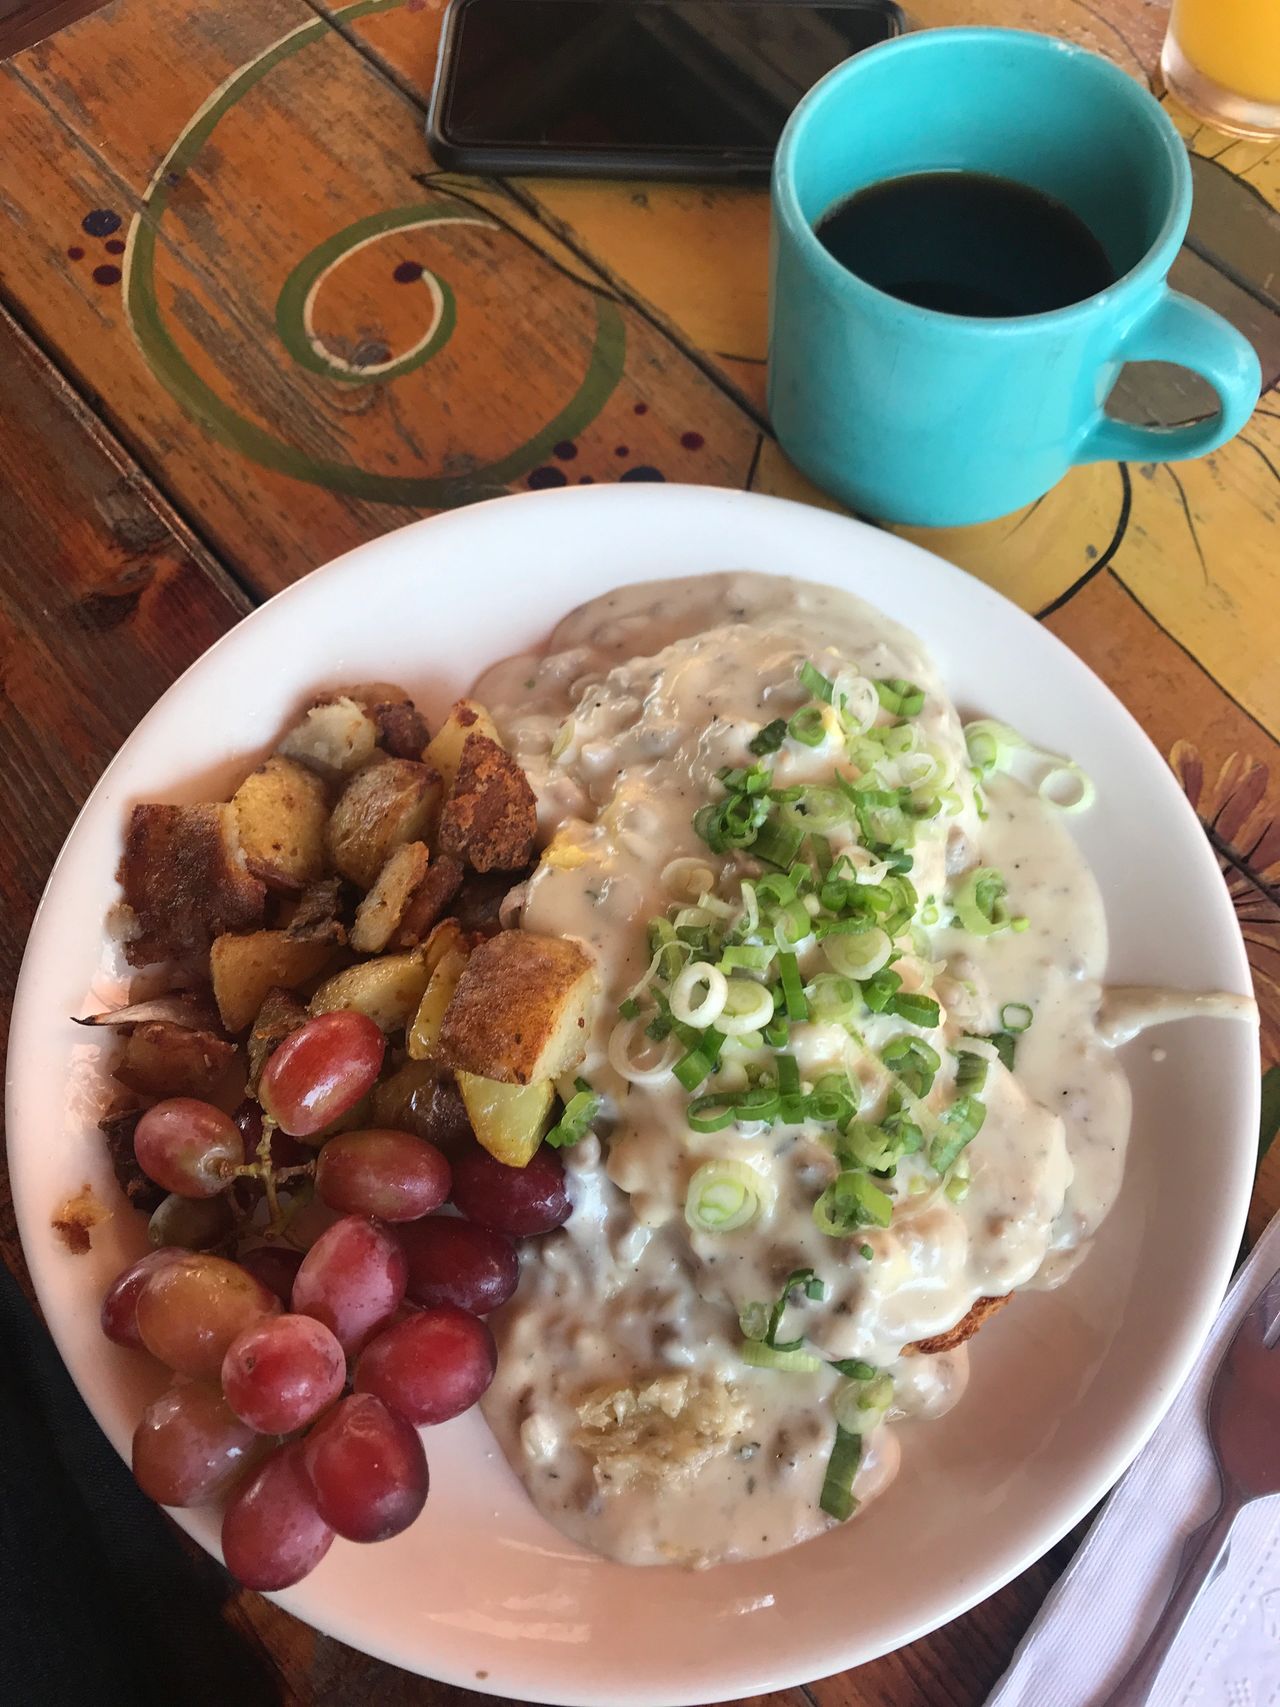 The Biscuits at Lucky's Cafe include scrambled eggs and sausage gravy